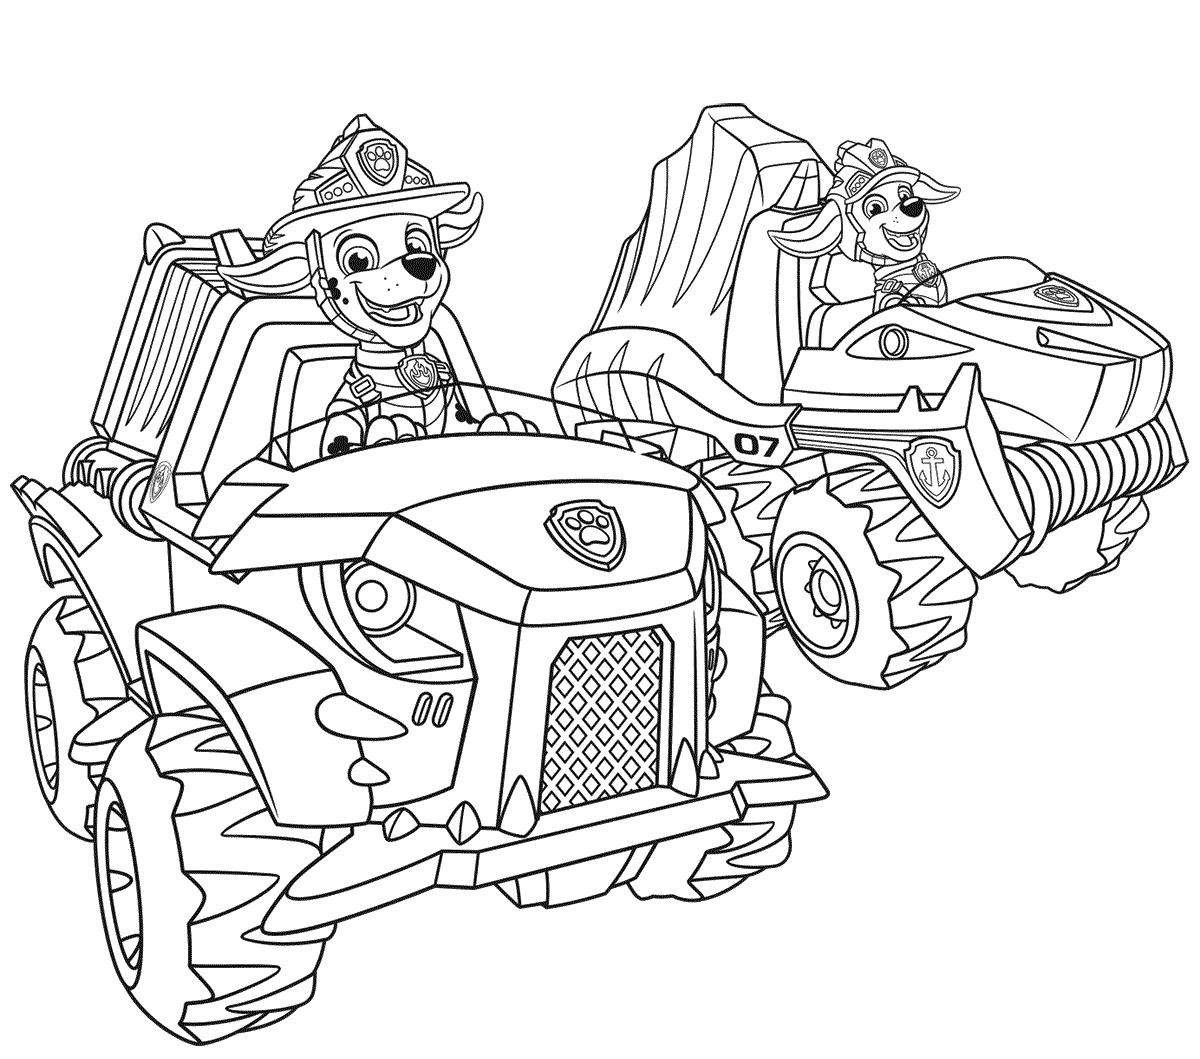 Paw Patrol Cars Page Coloring Page